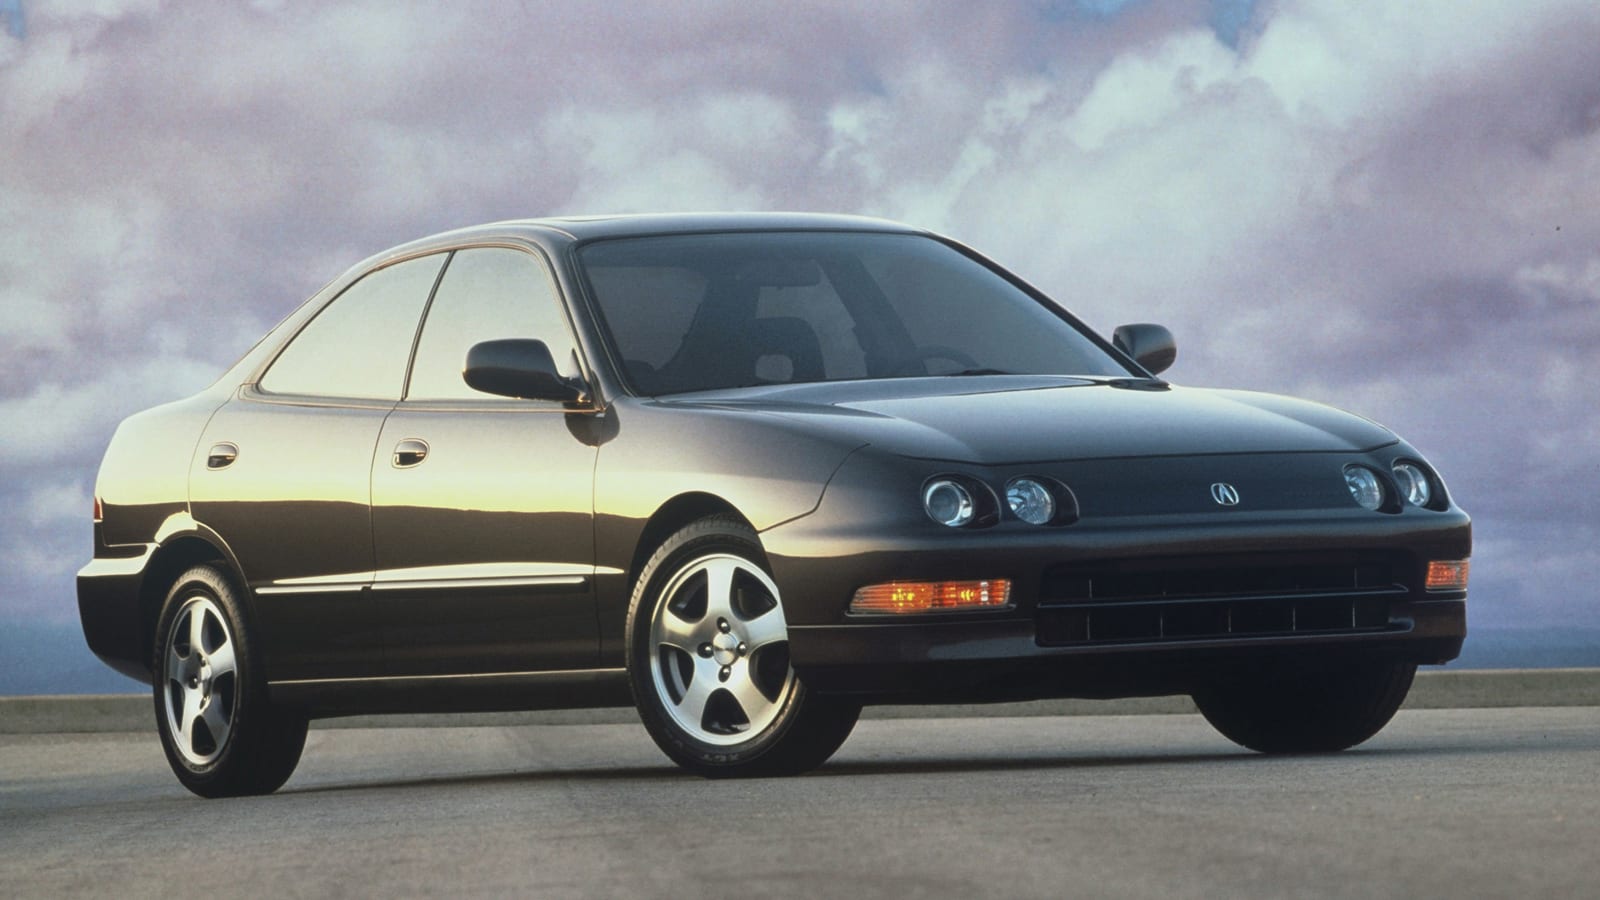 Acura Integra has been reborn, so let's take a look at its ...